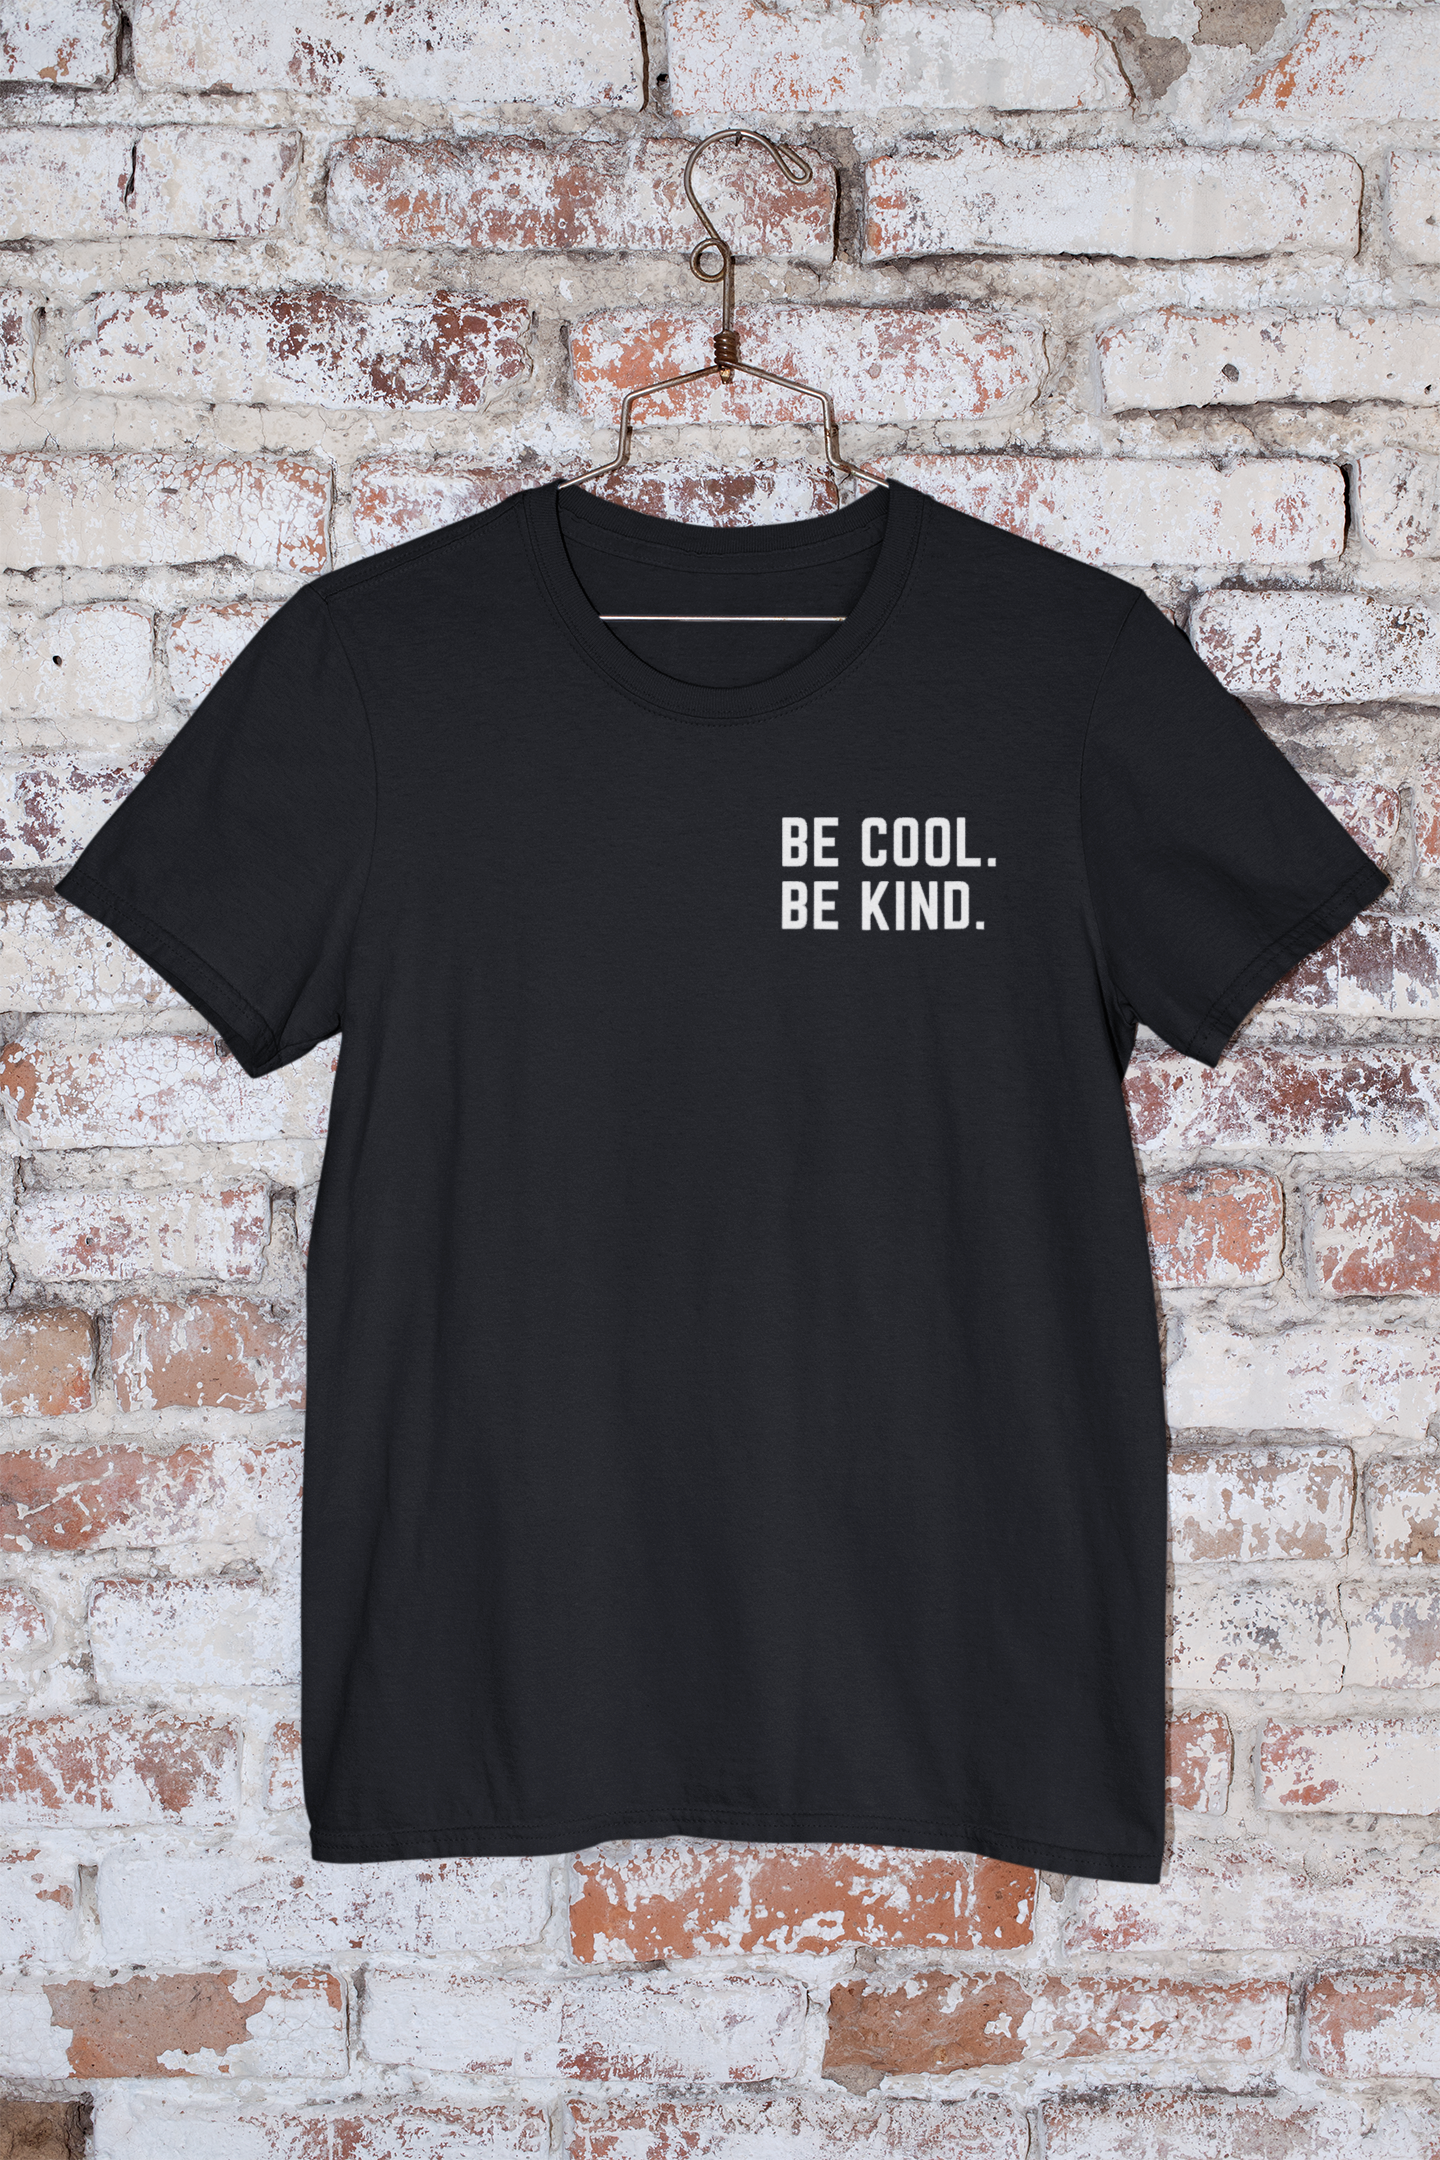 Be Cool. Be Kind.